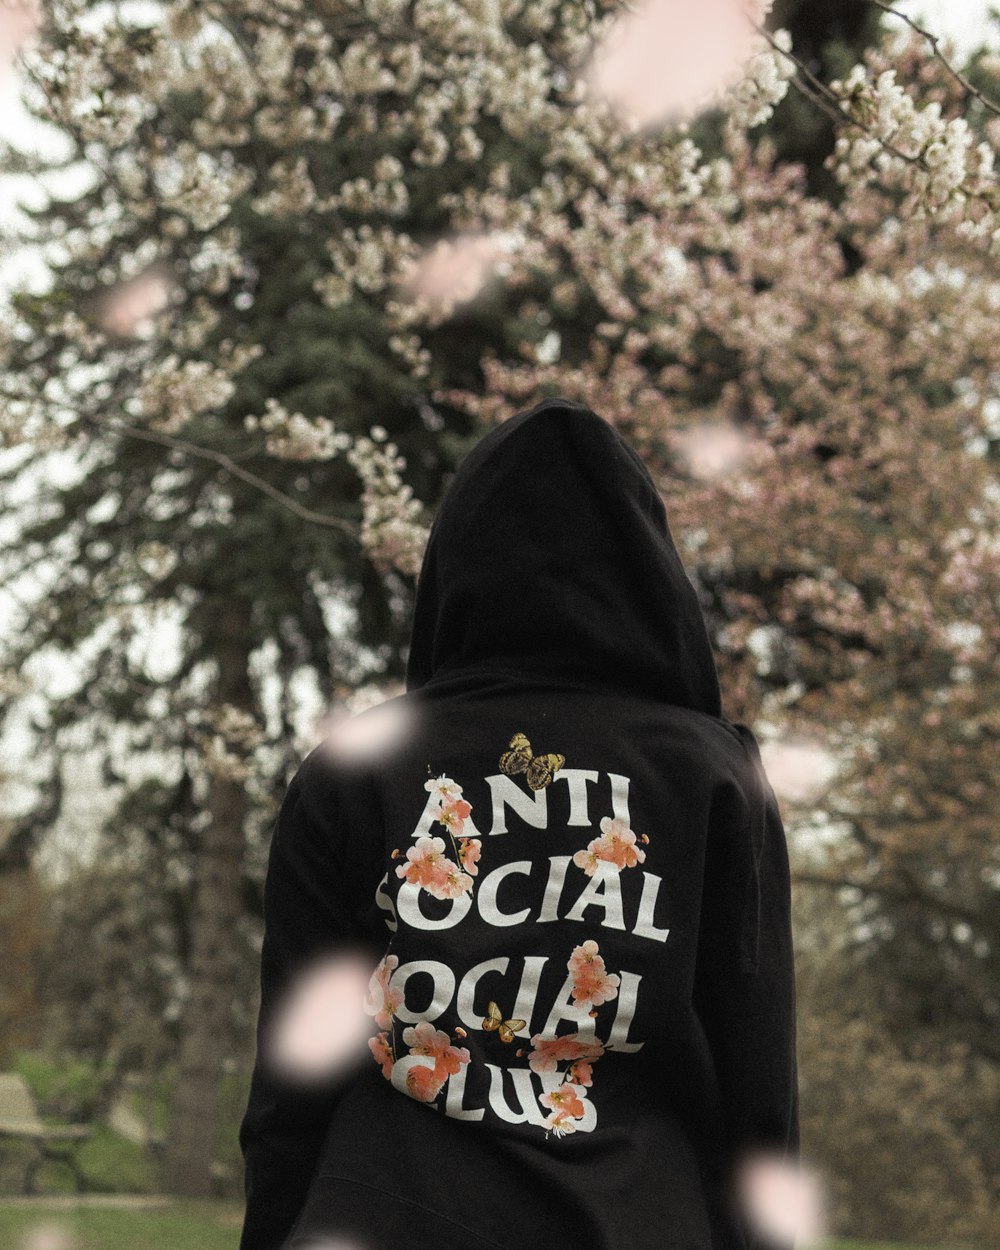 person wearing black and white Anti Social Club jacket